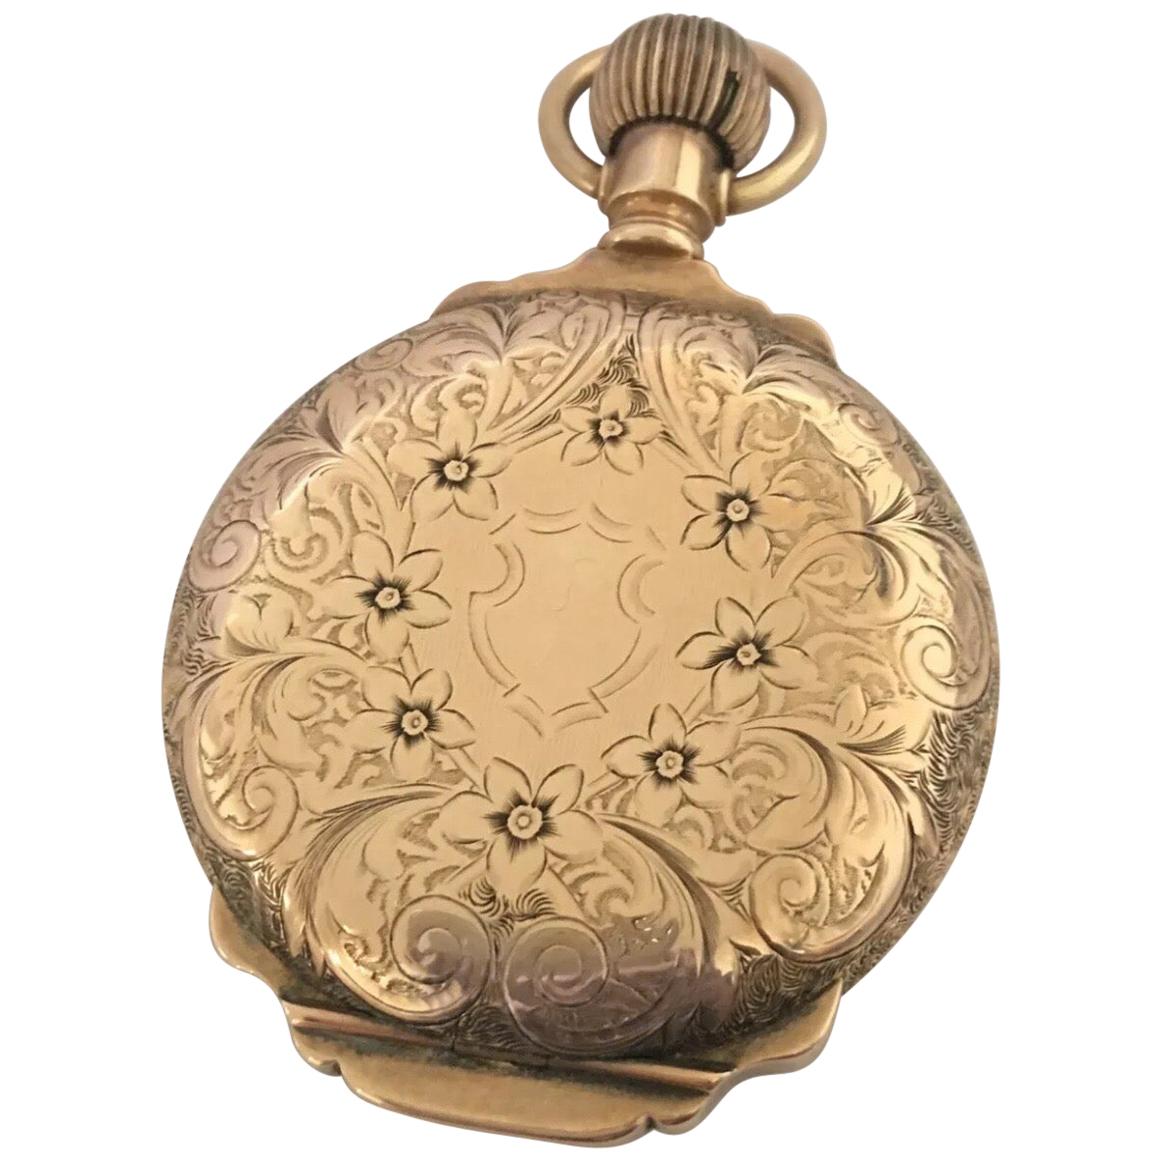 A Heavy 14K Gold Fully Engraved Case Full Hunter Elgin Antique Pocket Watch.


This beautiful watch is in good working condition and it is running well. visible signs of ageing and wear with light and small scratches on the gold full engraved case